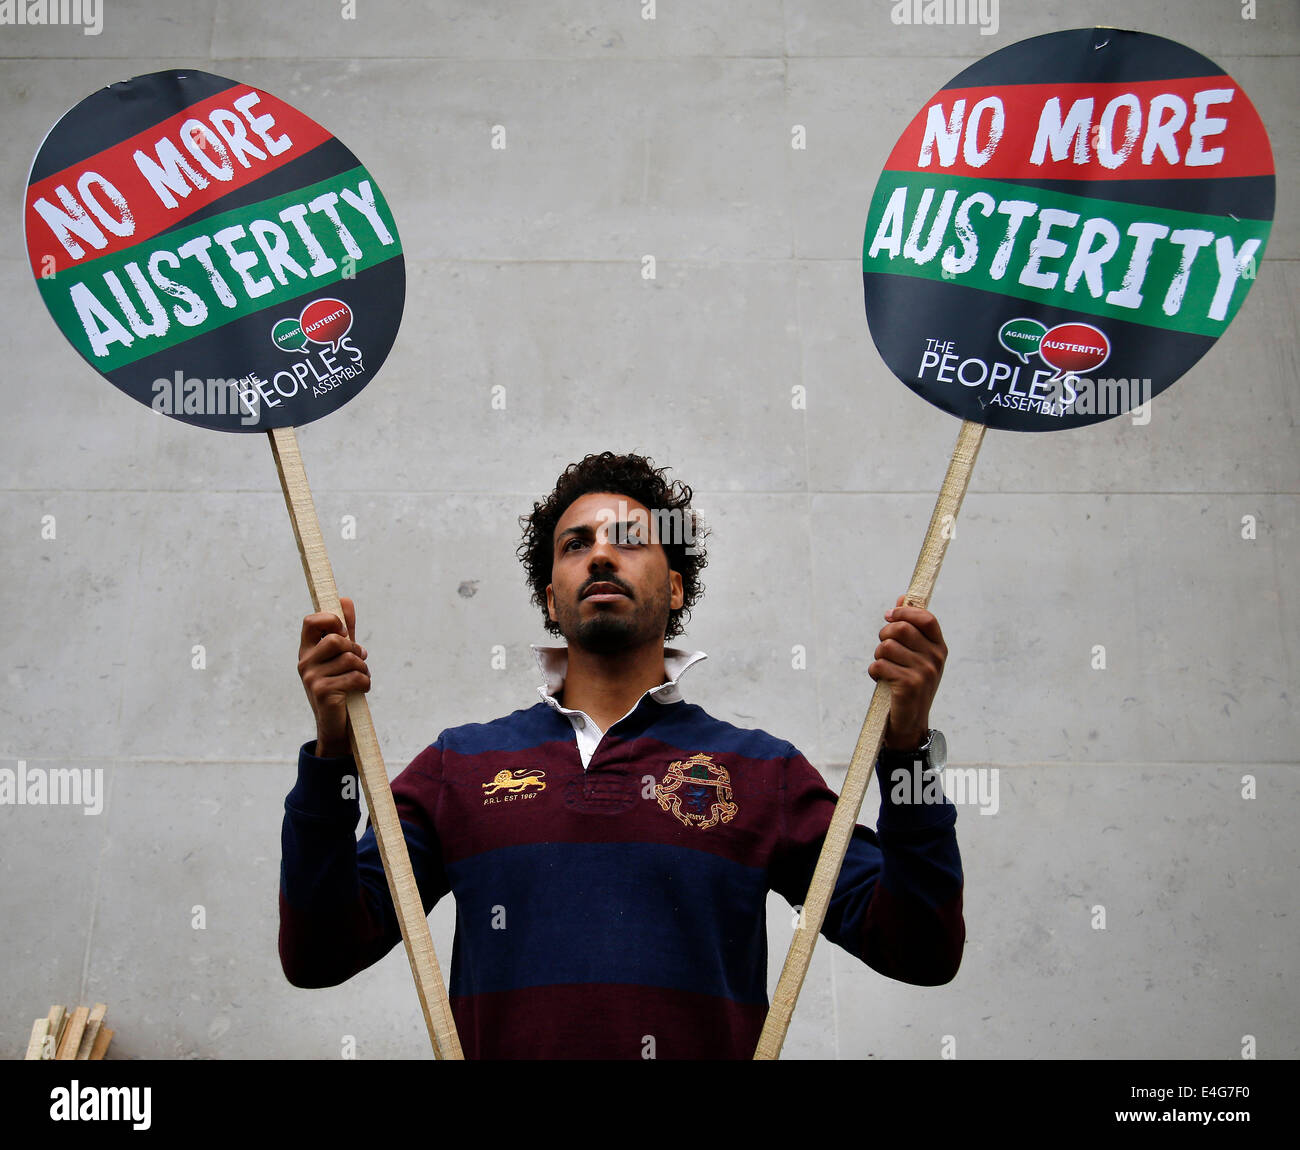 UK, London : A man holds 'No more Austerity' placards during a protest against government cuts in London on 10 July, 2014. Stock Photo